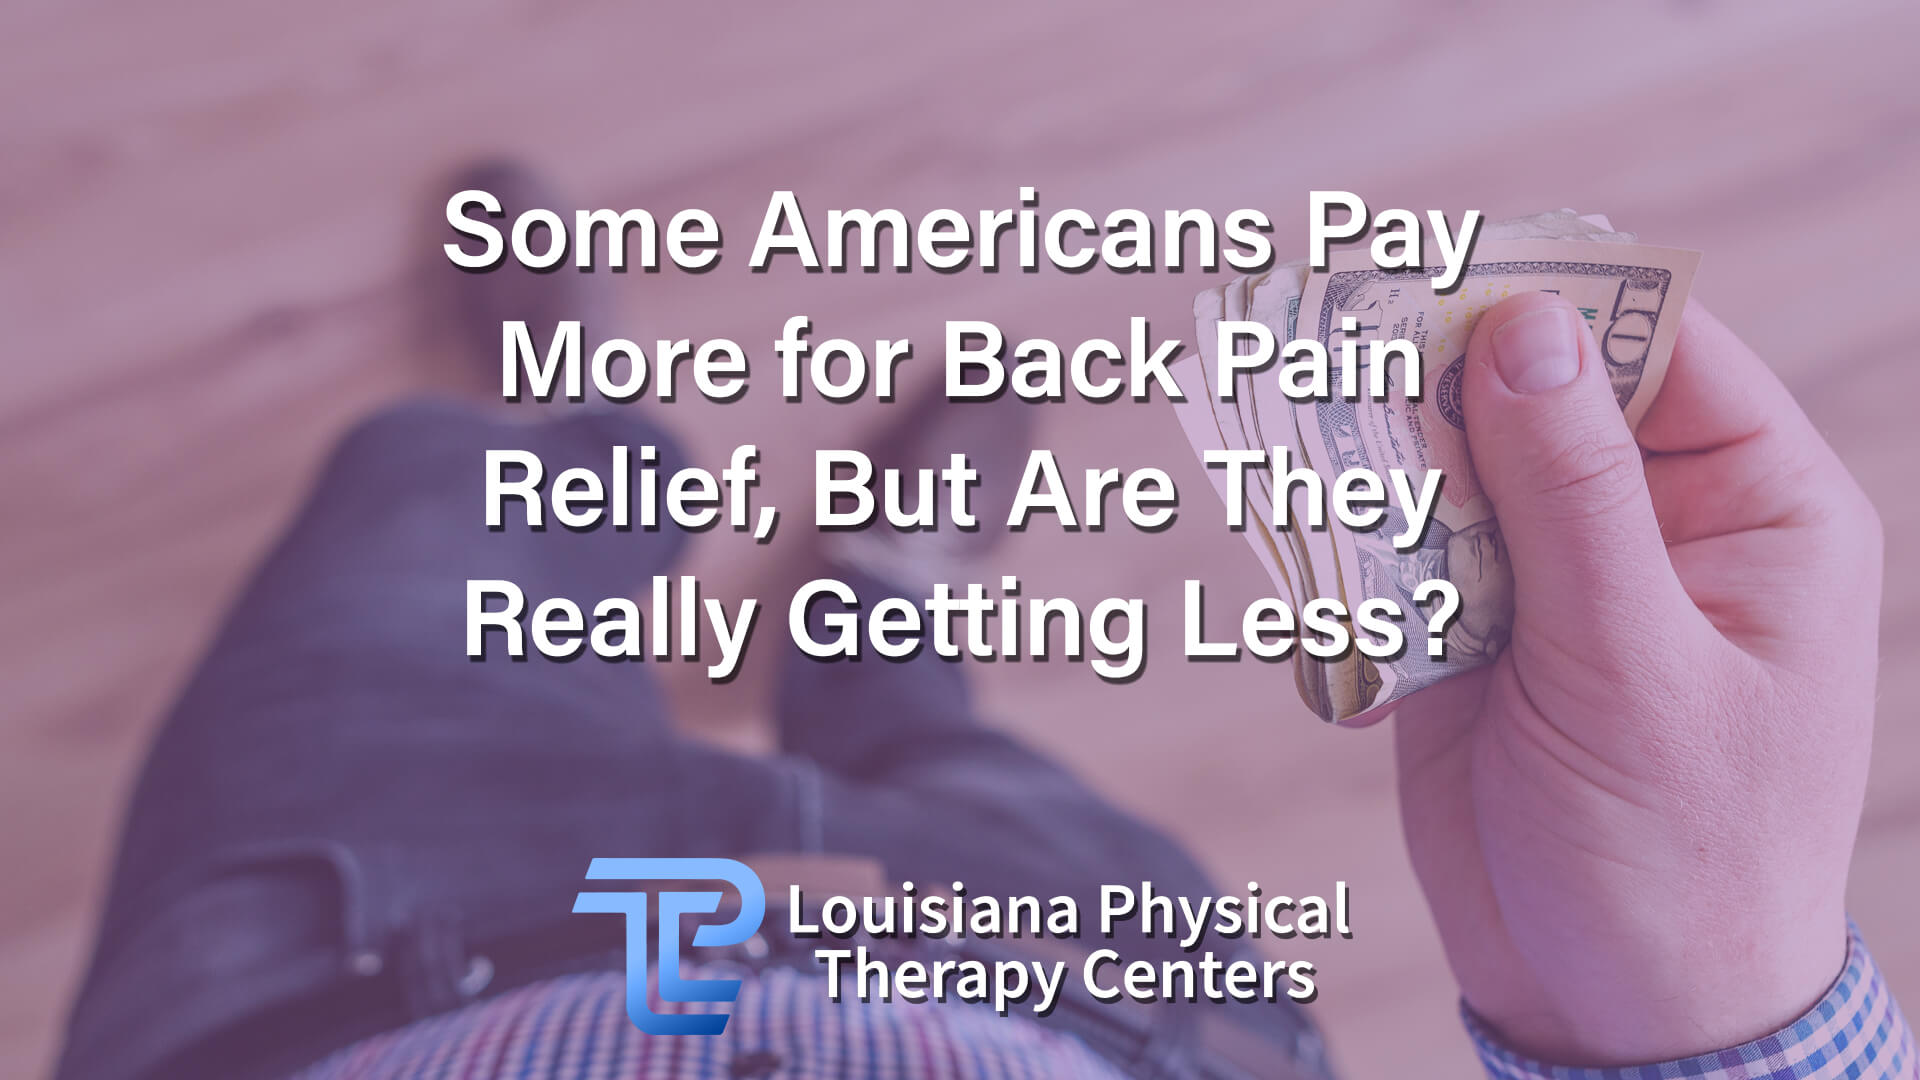 Some Americans Pay More for Back Pain Relief, But Are They Really Getting Less?